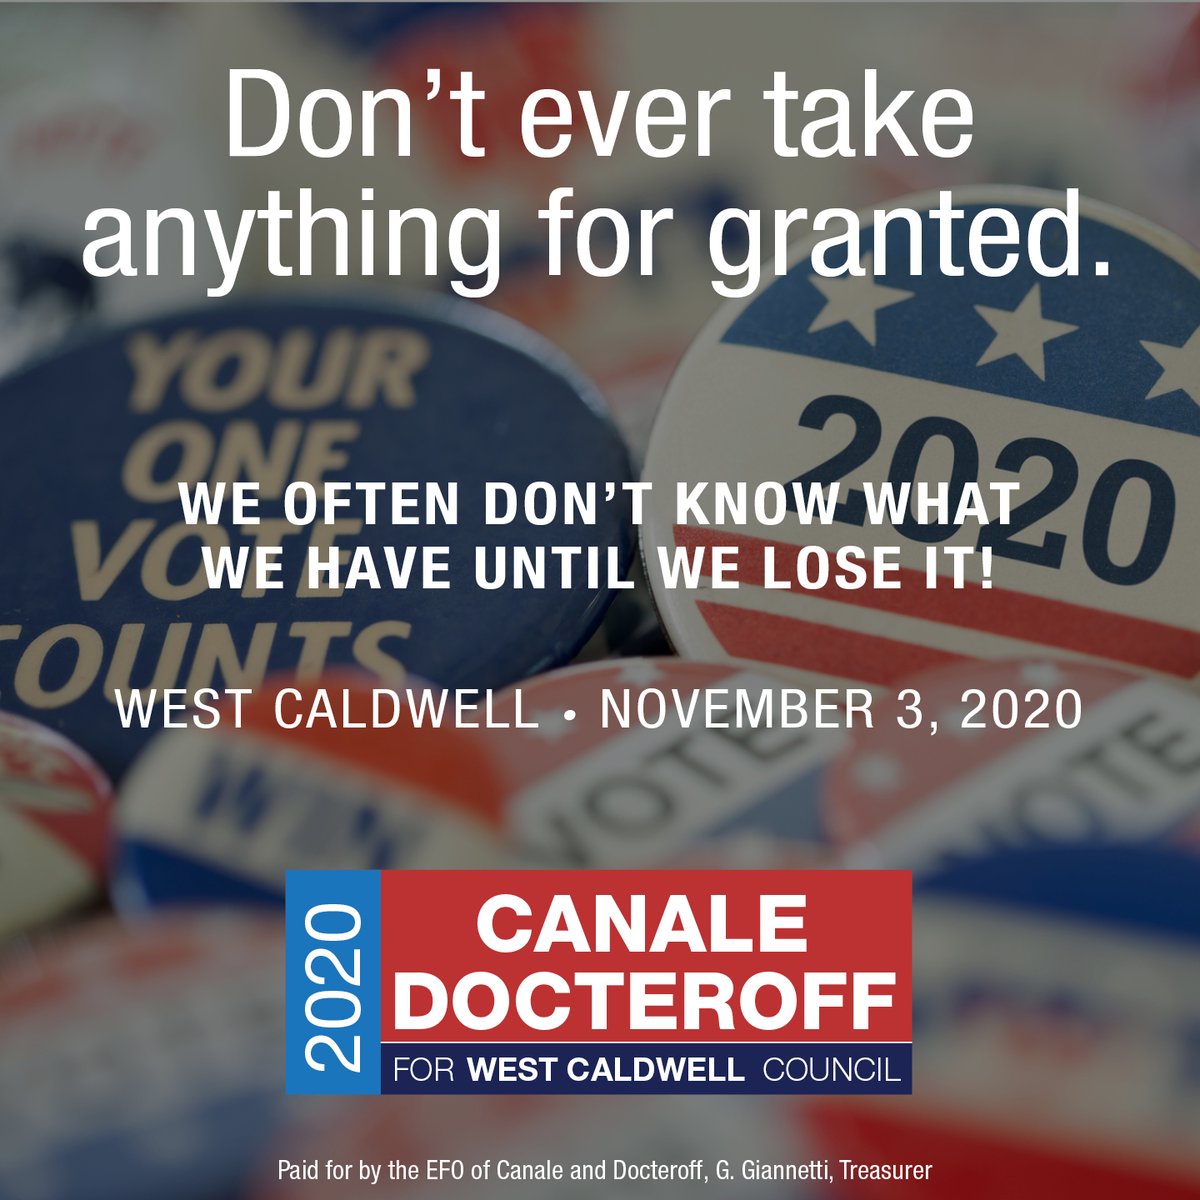 Our past has taught us that every single vote counts! Select 10B and 11B to keep West Caldwell moving in the right direction!
🇺🇸
#everyvotecounts #canaledocteroff #localmattersmost #transparency #canaledocteroff2020 #VOTE #westcaldwellnj #westcaldwell #election2020 #vote2020